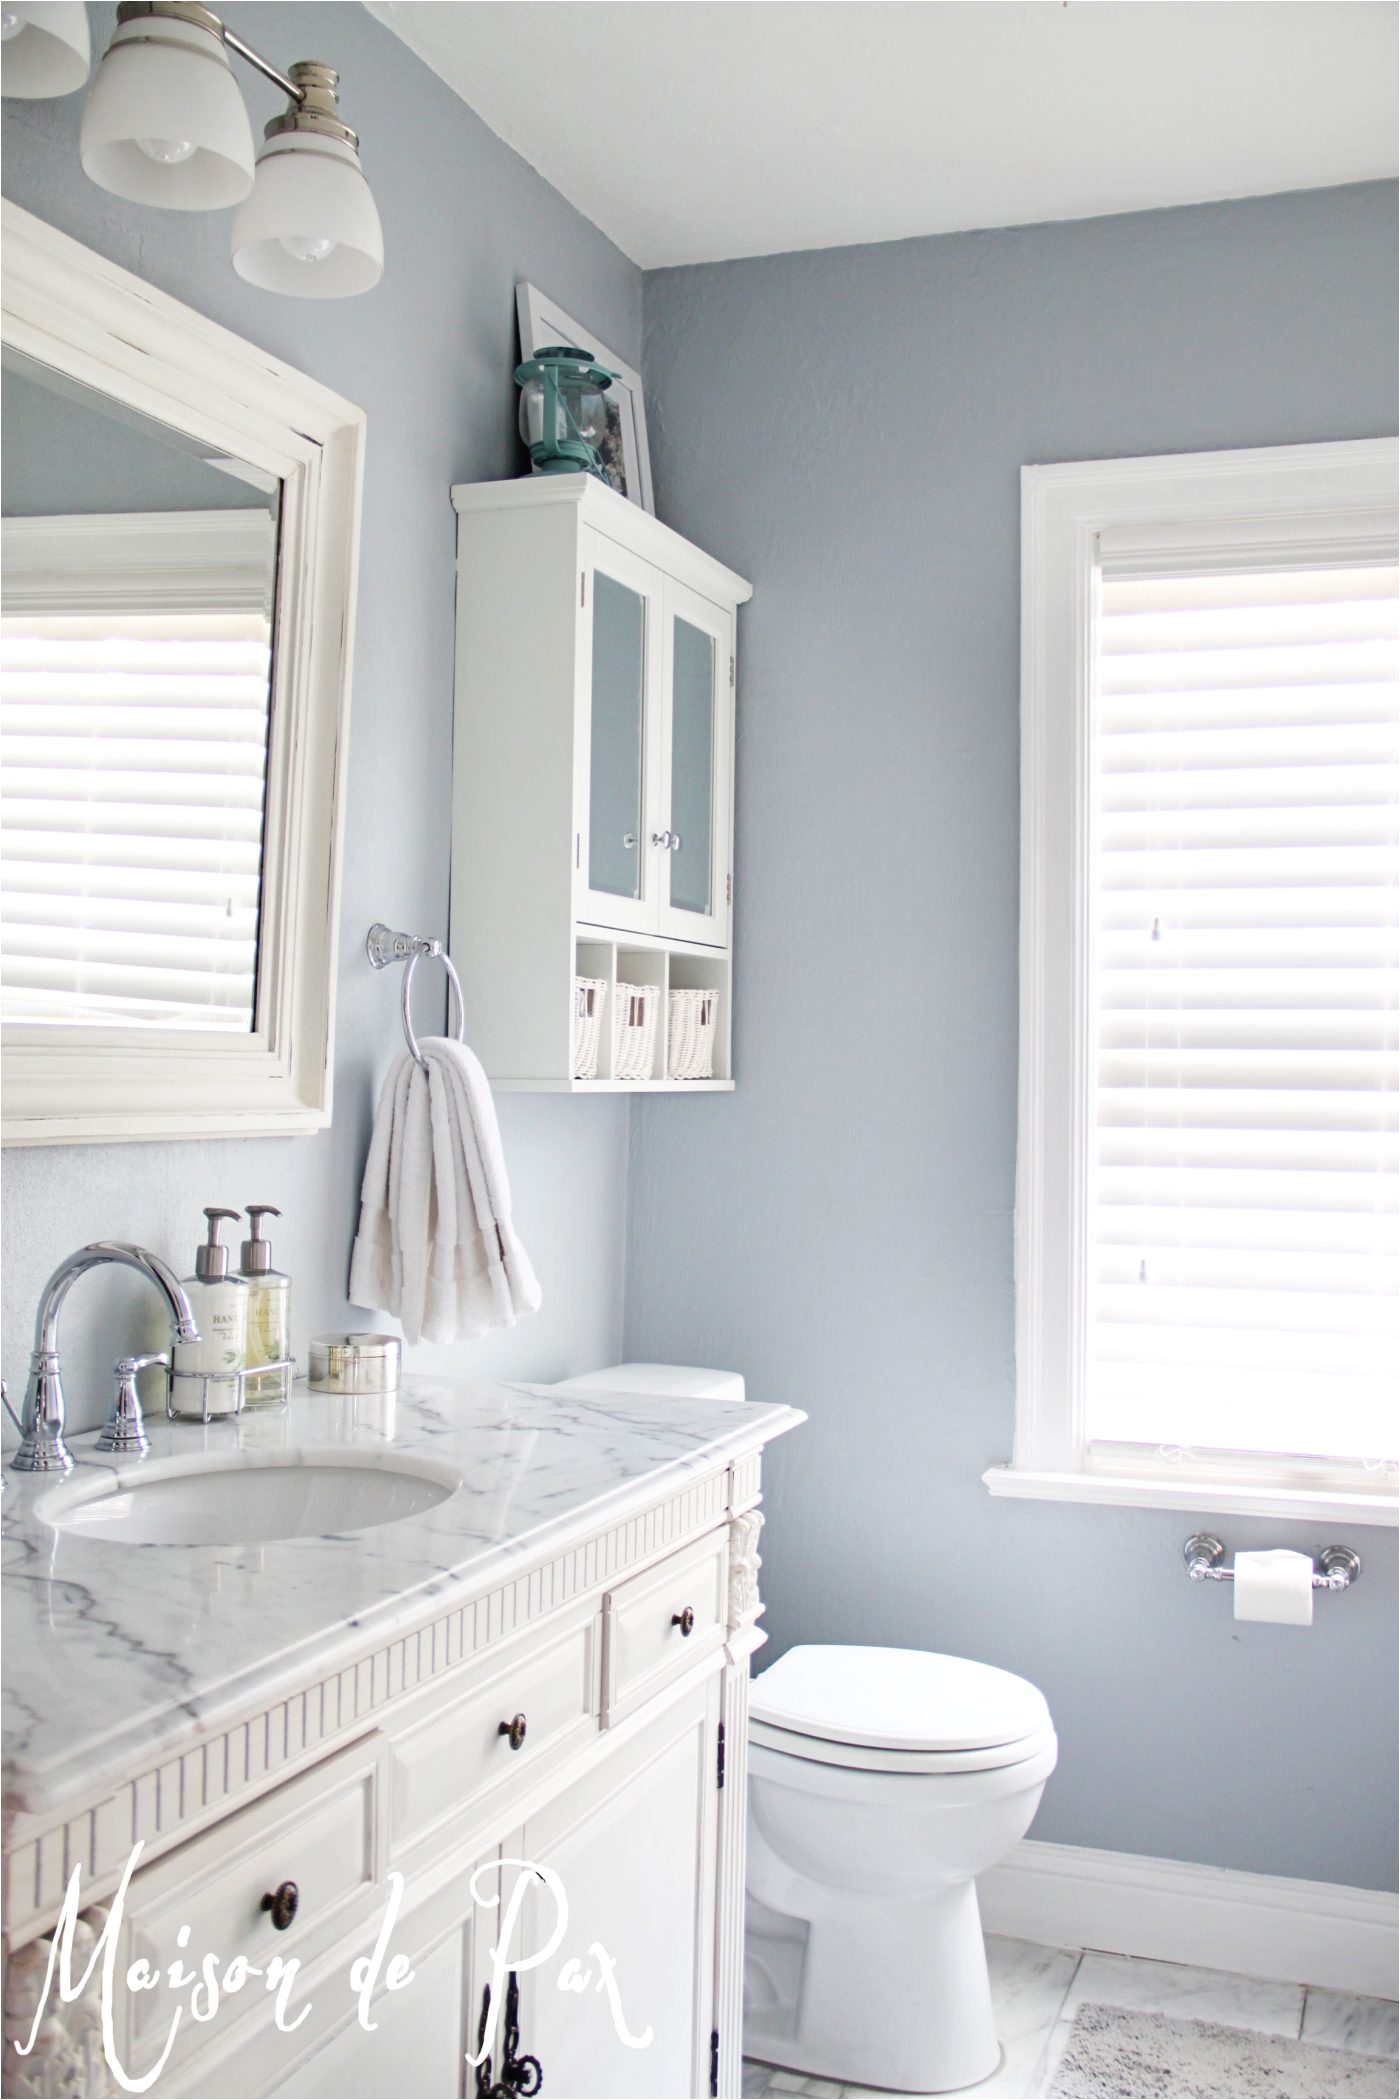 10 tips for designing a small bathroom